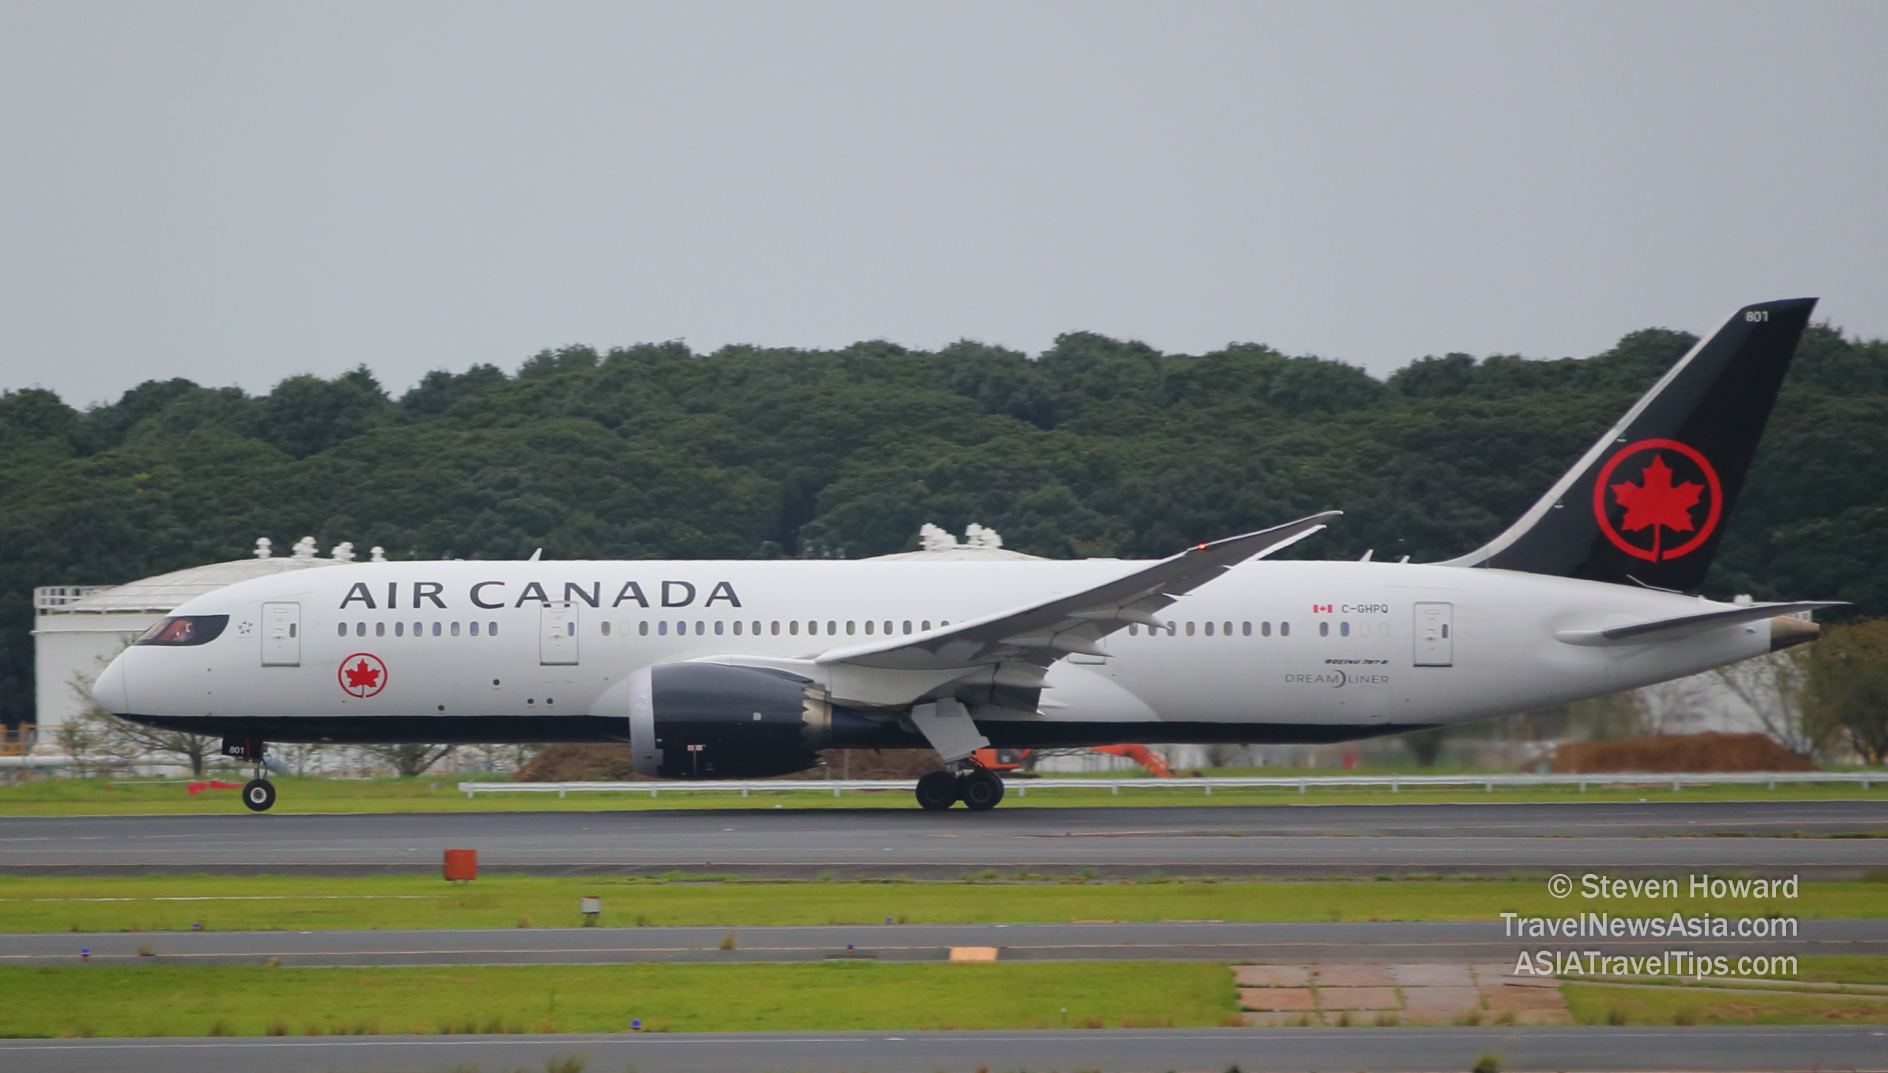 Air Canada Boeing 787-8 reg: C-GHPQ. Picture by Steven Howard of TravelNewsAsia.com Click to enlarge.